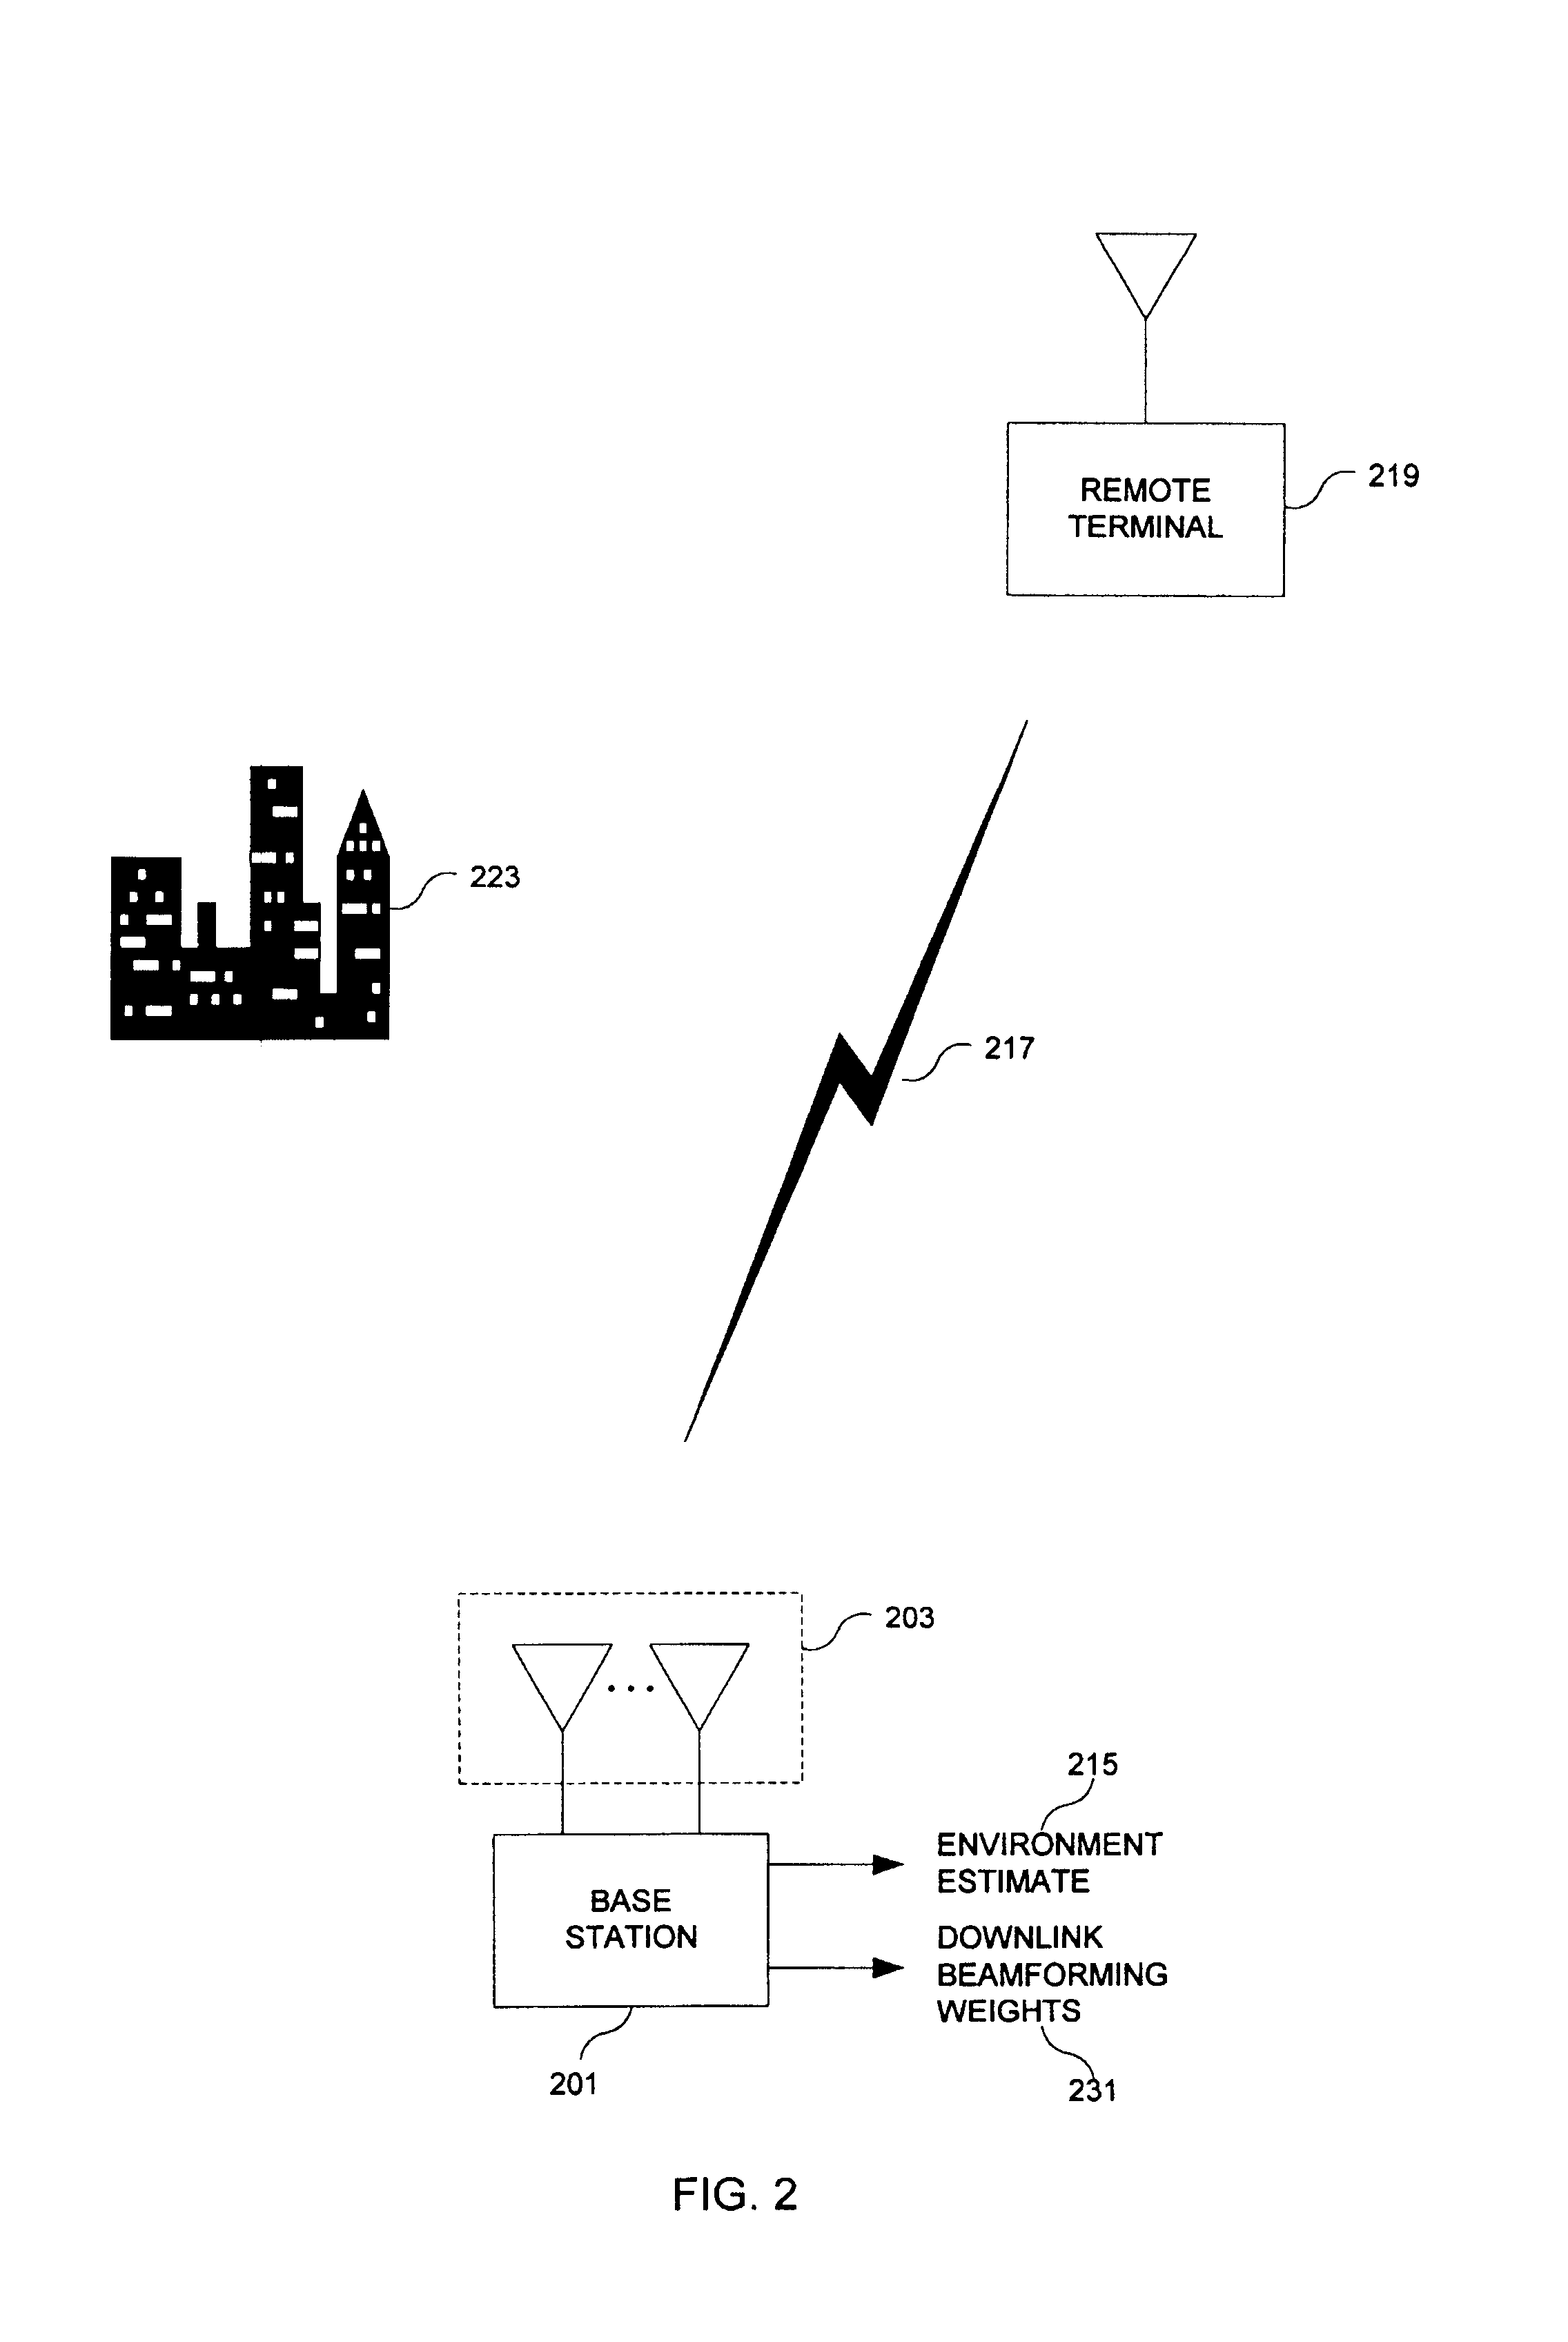 Method and apparatus for estimating downlink beamforming weights in a communications system